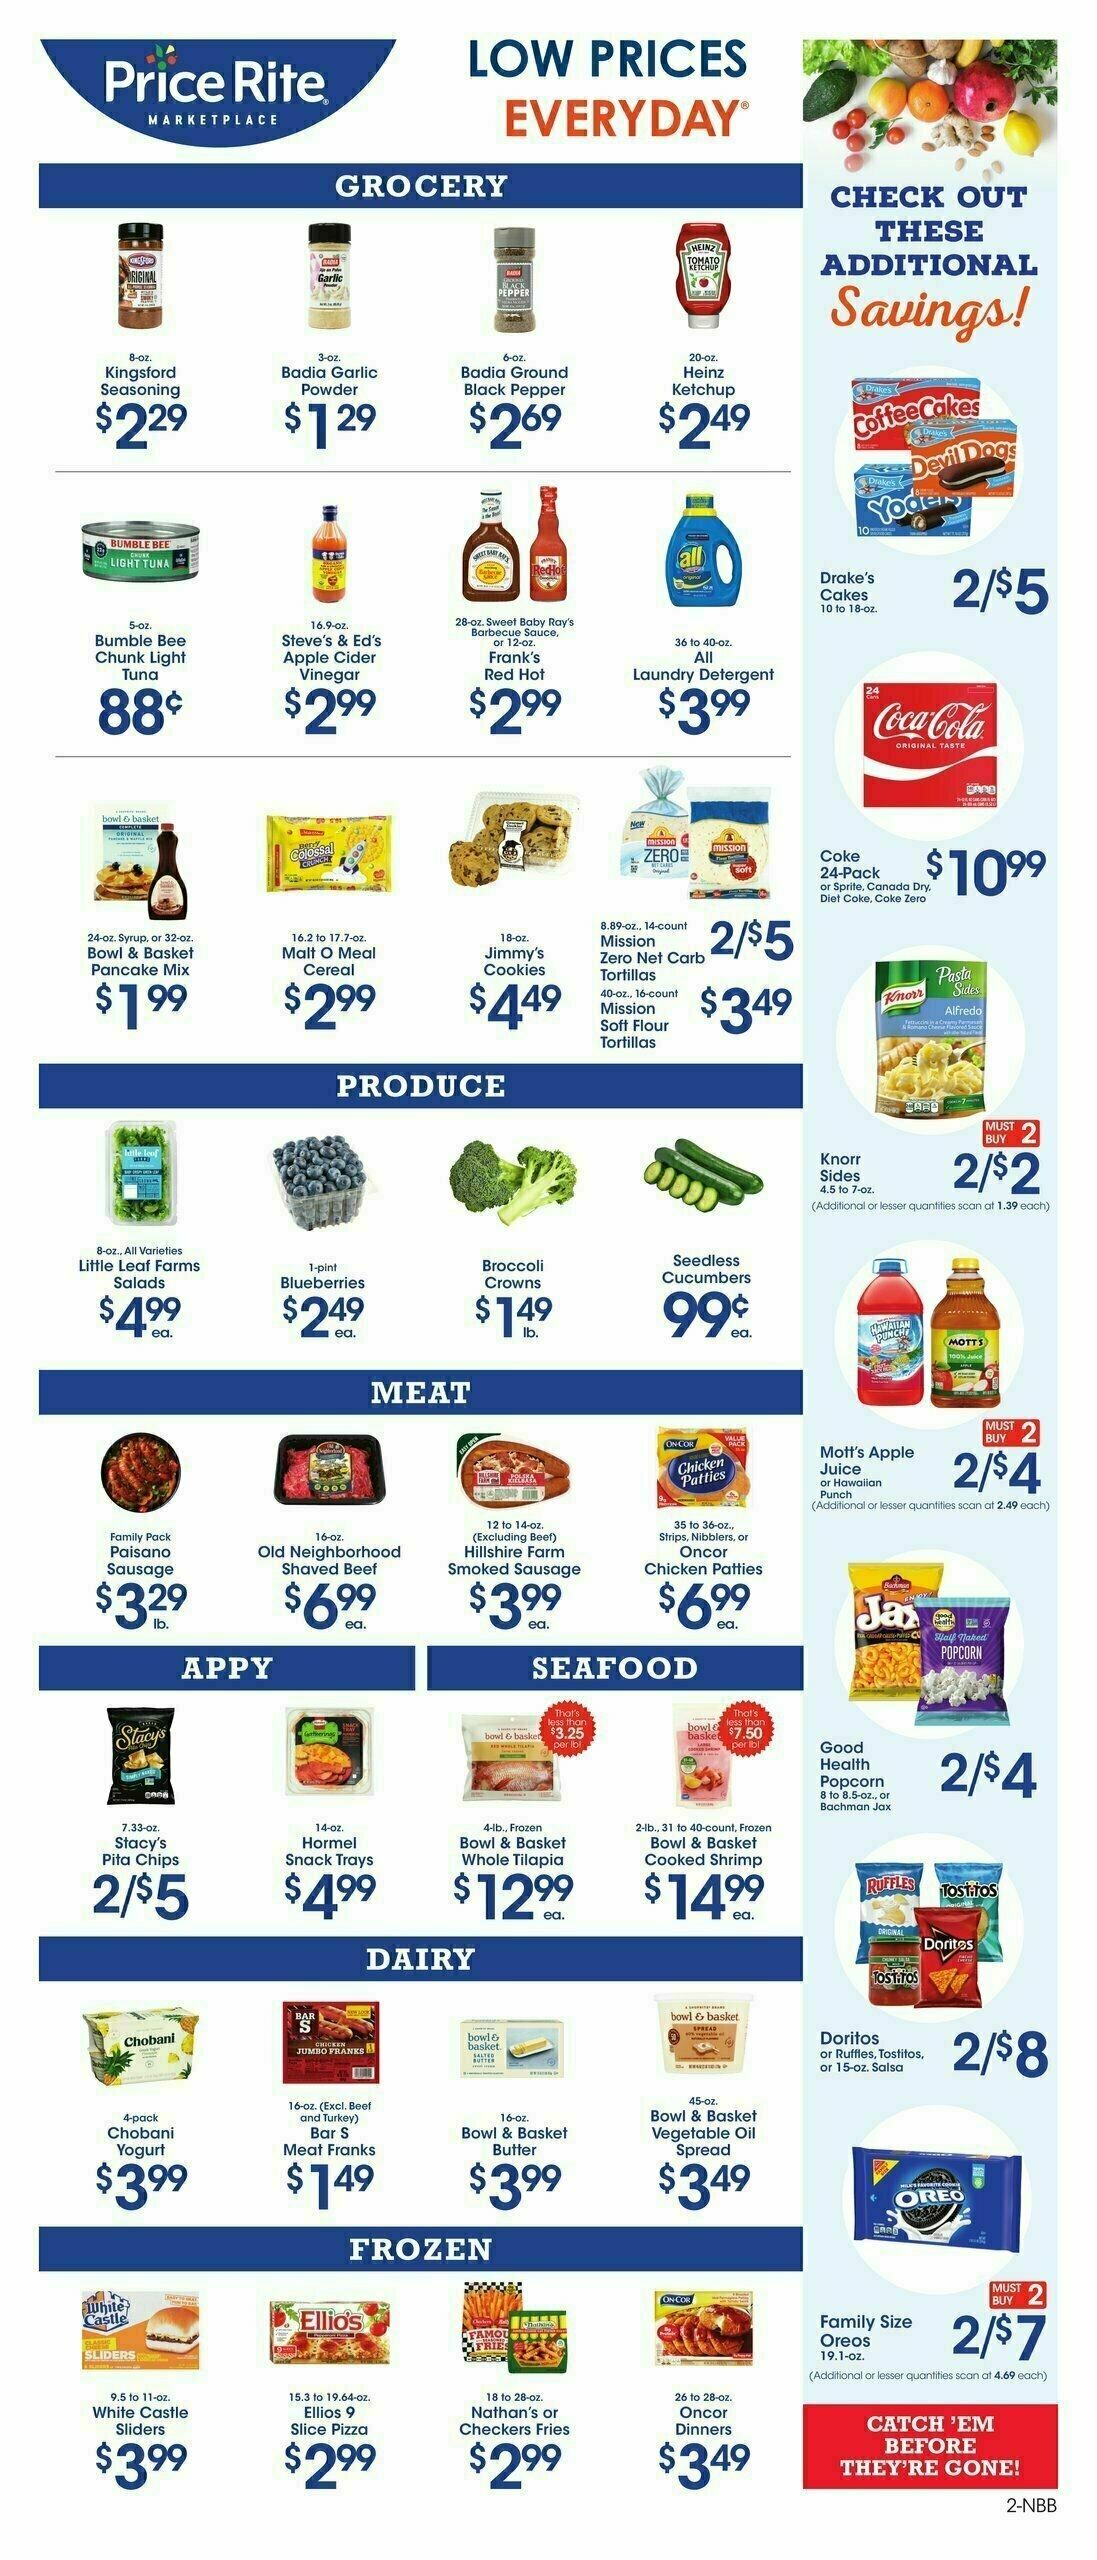 Price Rite Weekly Ad from January 19